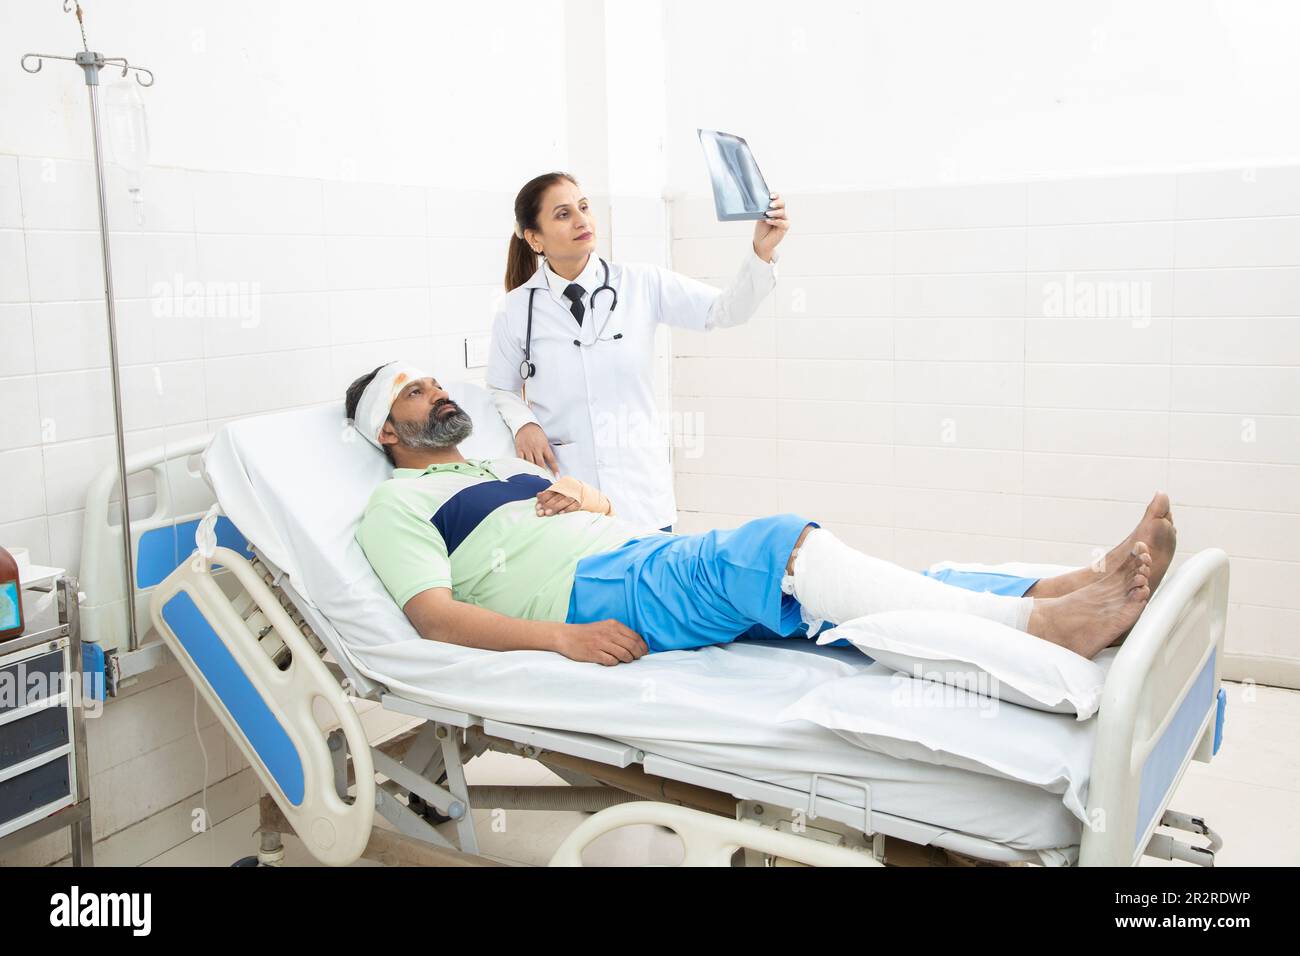 Indian man patient lying on bed with fractured leg and orthopedic doctor looking at foot X-ray film giving recovery advice. Stock Photo